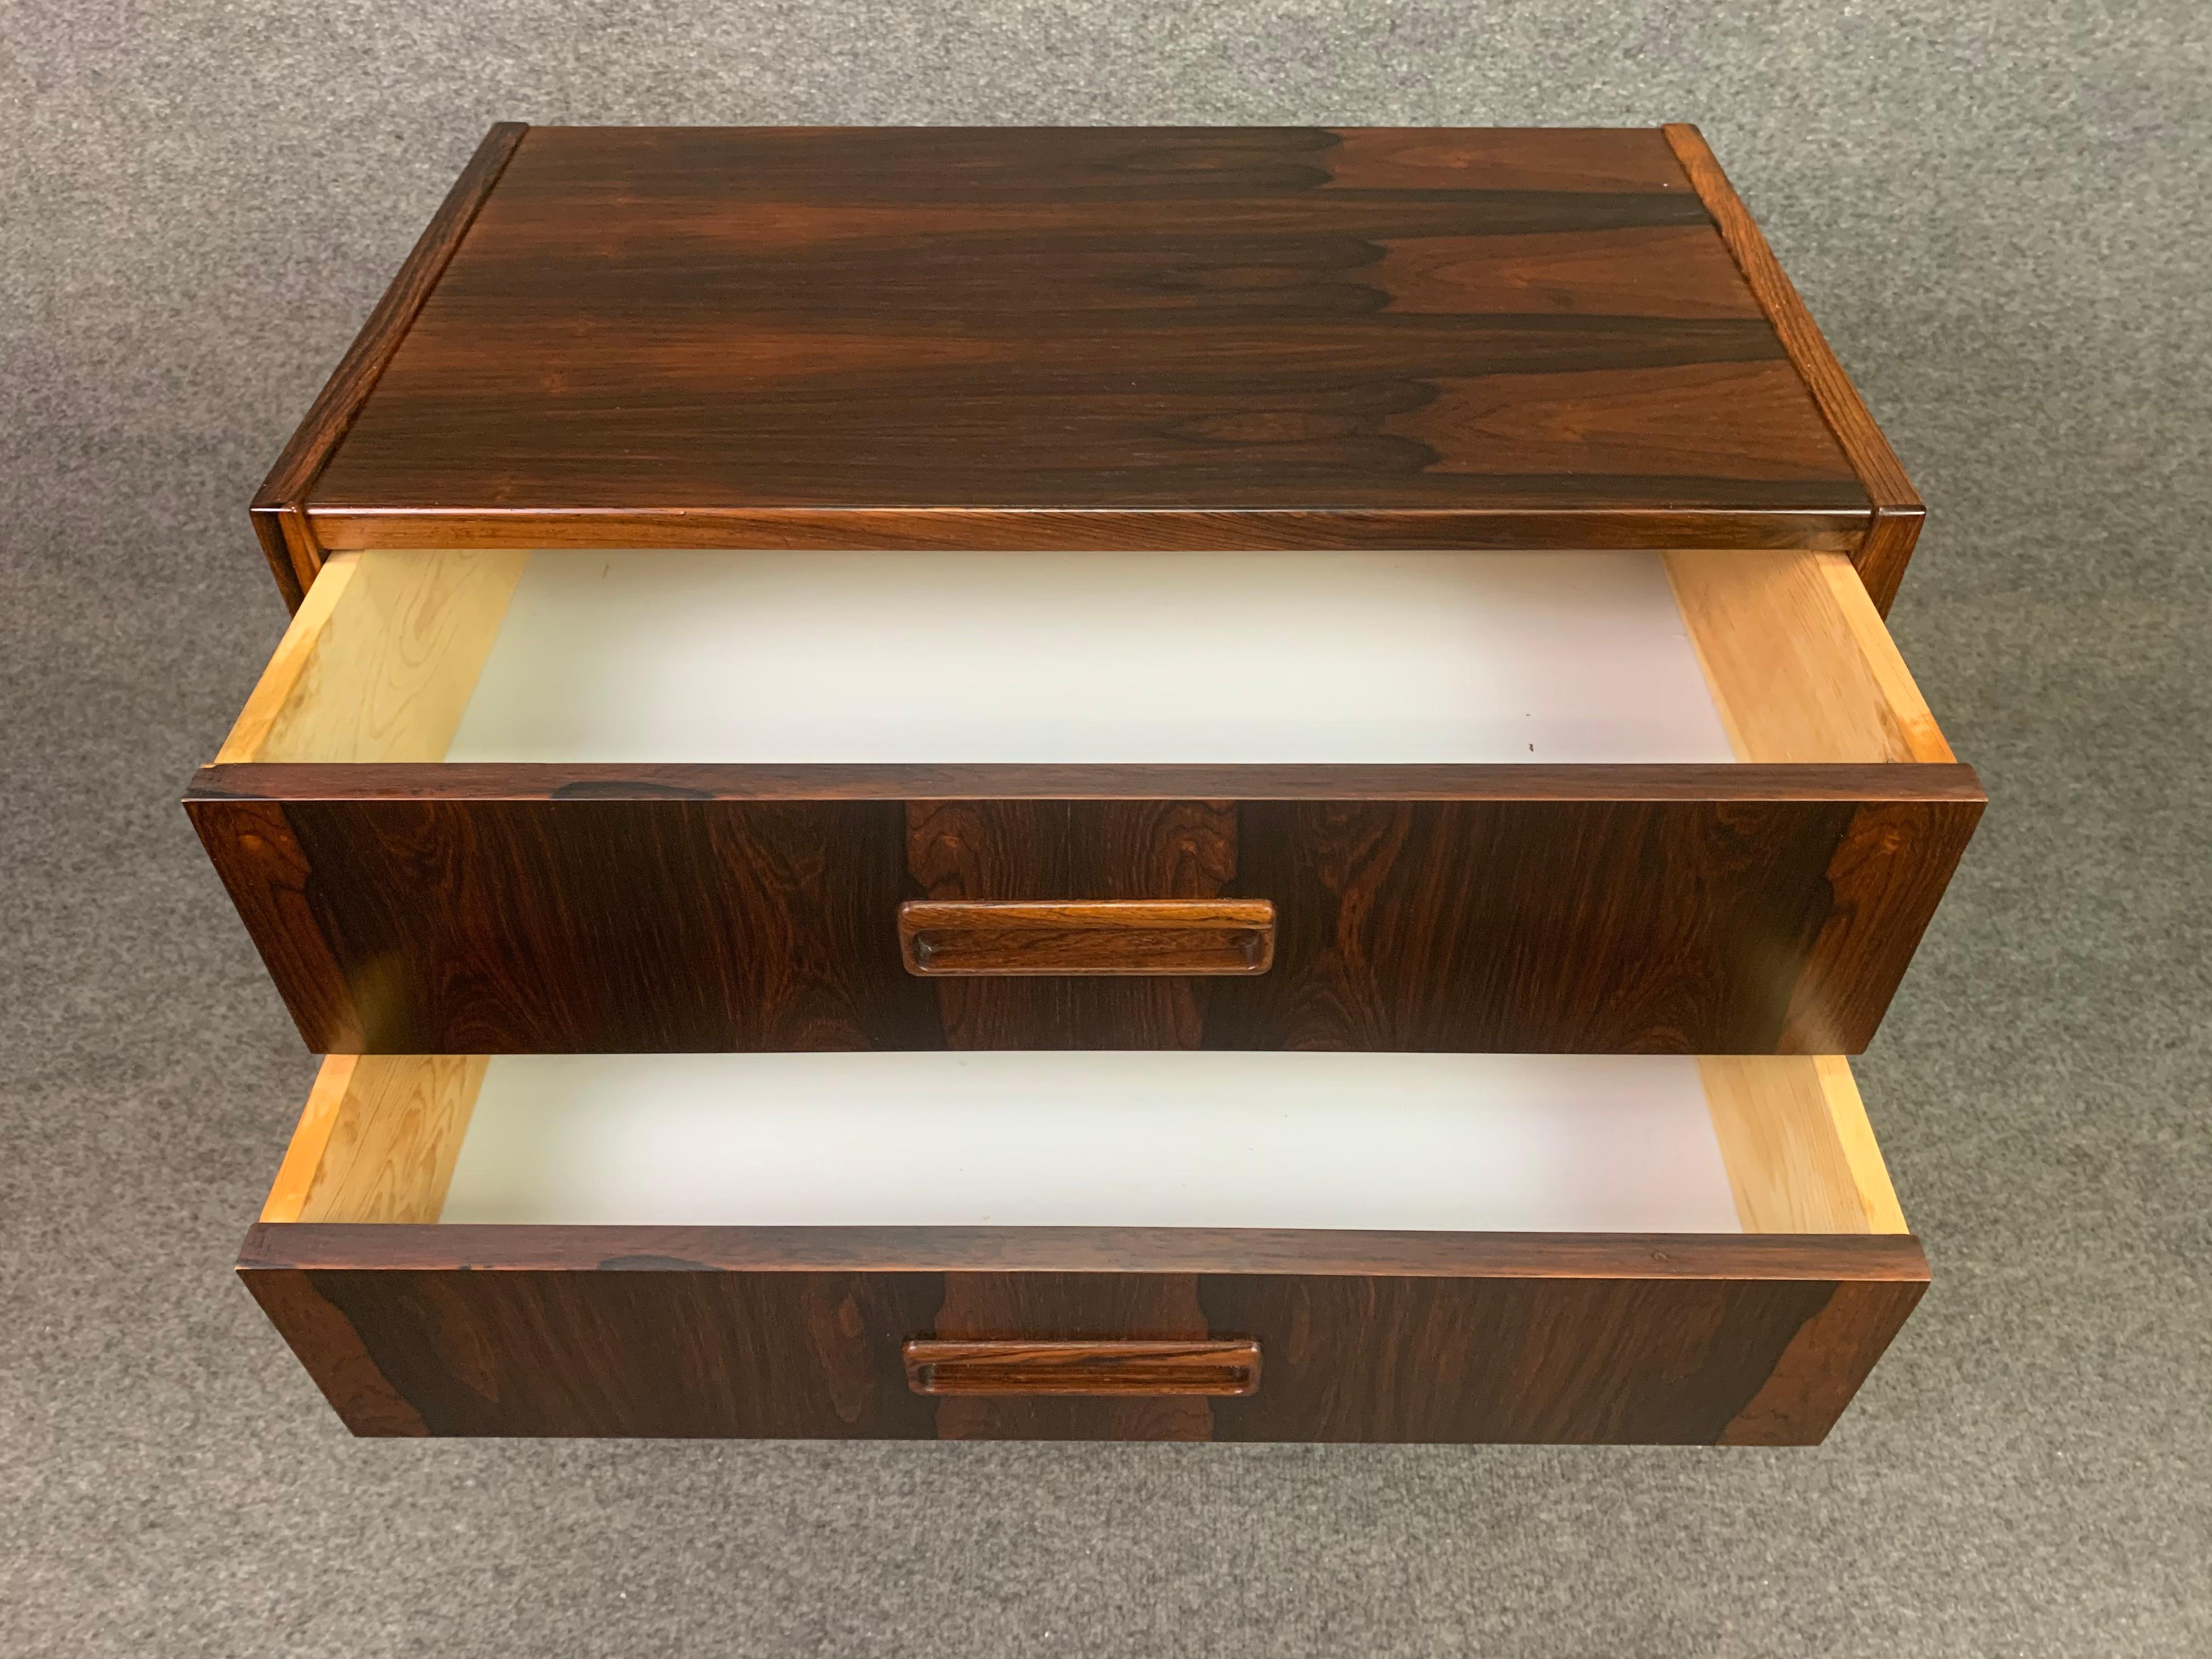 Here is a beautiful Scandinavian modern small chest in rosewood manufactured in Denmark in the 1960s.
This lovely piece features a vibrant wood grain, two dove tail built drawers with sculpted recessed pulls and four solid tapered legs.
Excellent